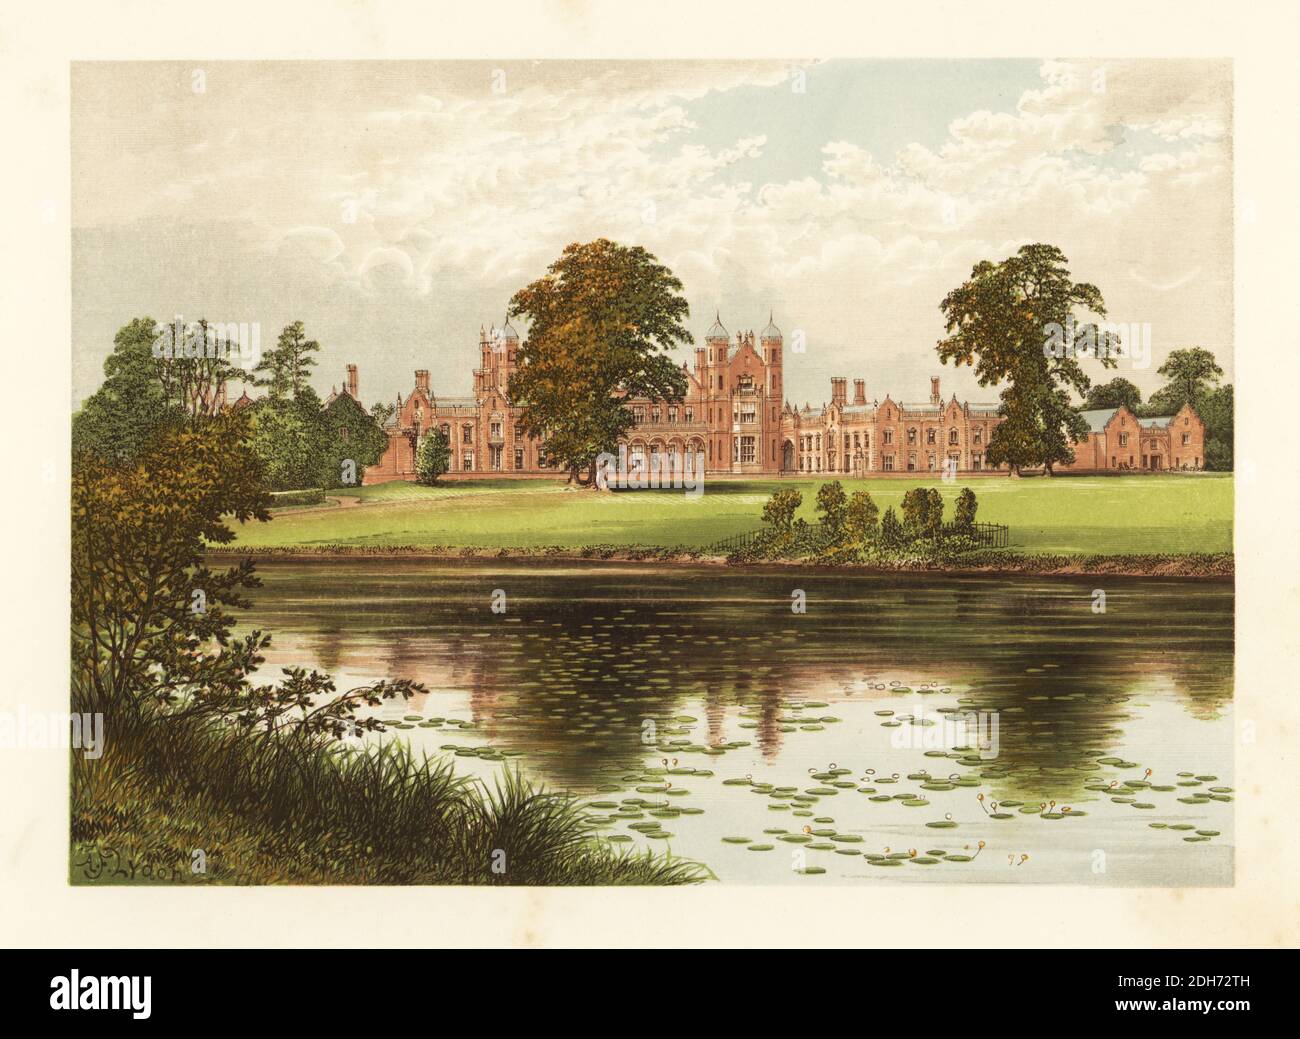 Capesthorne Hall, Cheshire, England. Neoclassical-style house in red brick built from designs by architect William Smith, remodelled with Jacobean style frontage in the 1830s by Edward Blore. Conservatory by Joseph Paxton. Home of Arthur Henry Davenport. Colour woodblock by Benjamin Fawcett in the Baxter process of an illustration by Alexander Francis Lydon from Reverend Francis Orpen Morris’s Picturesque Views of the Seats of Noblemen and Gentlemen of Great Britain and Ireland, William Mackenzie, London, 1880. Stock Photo